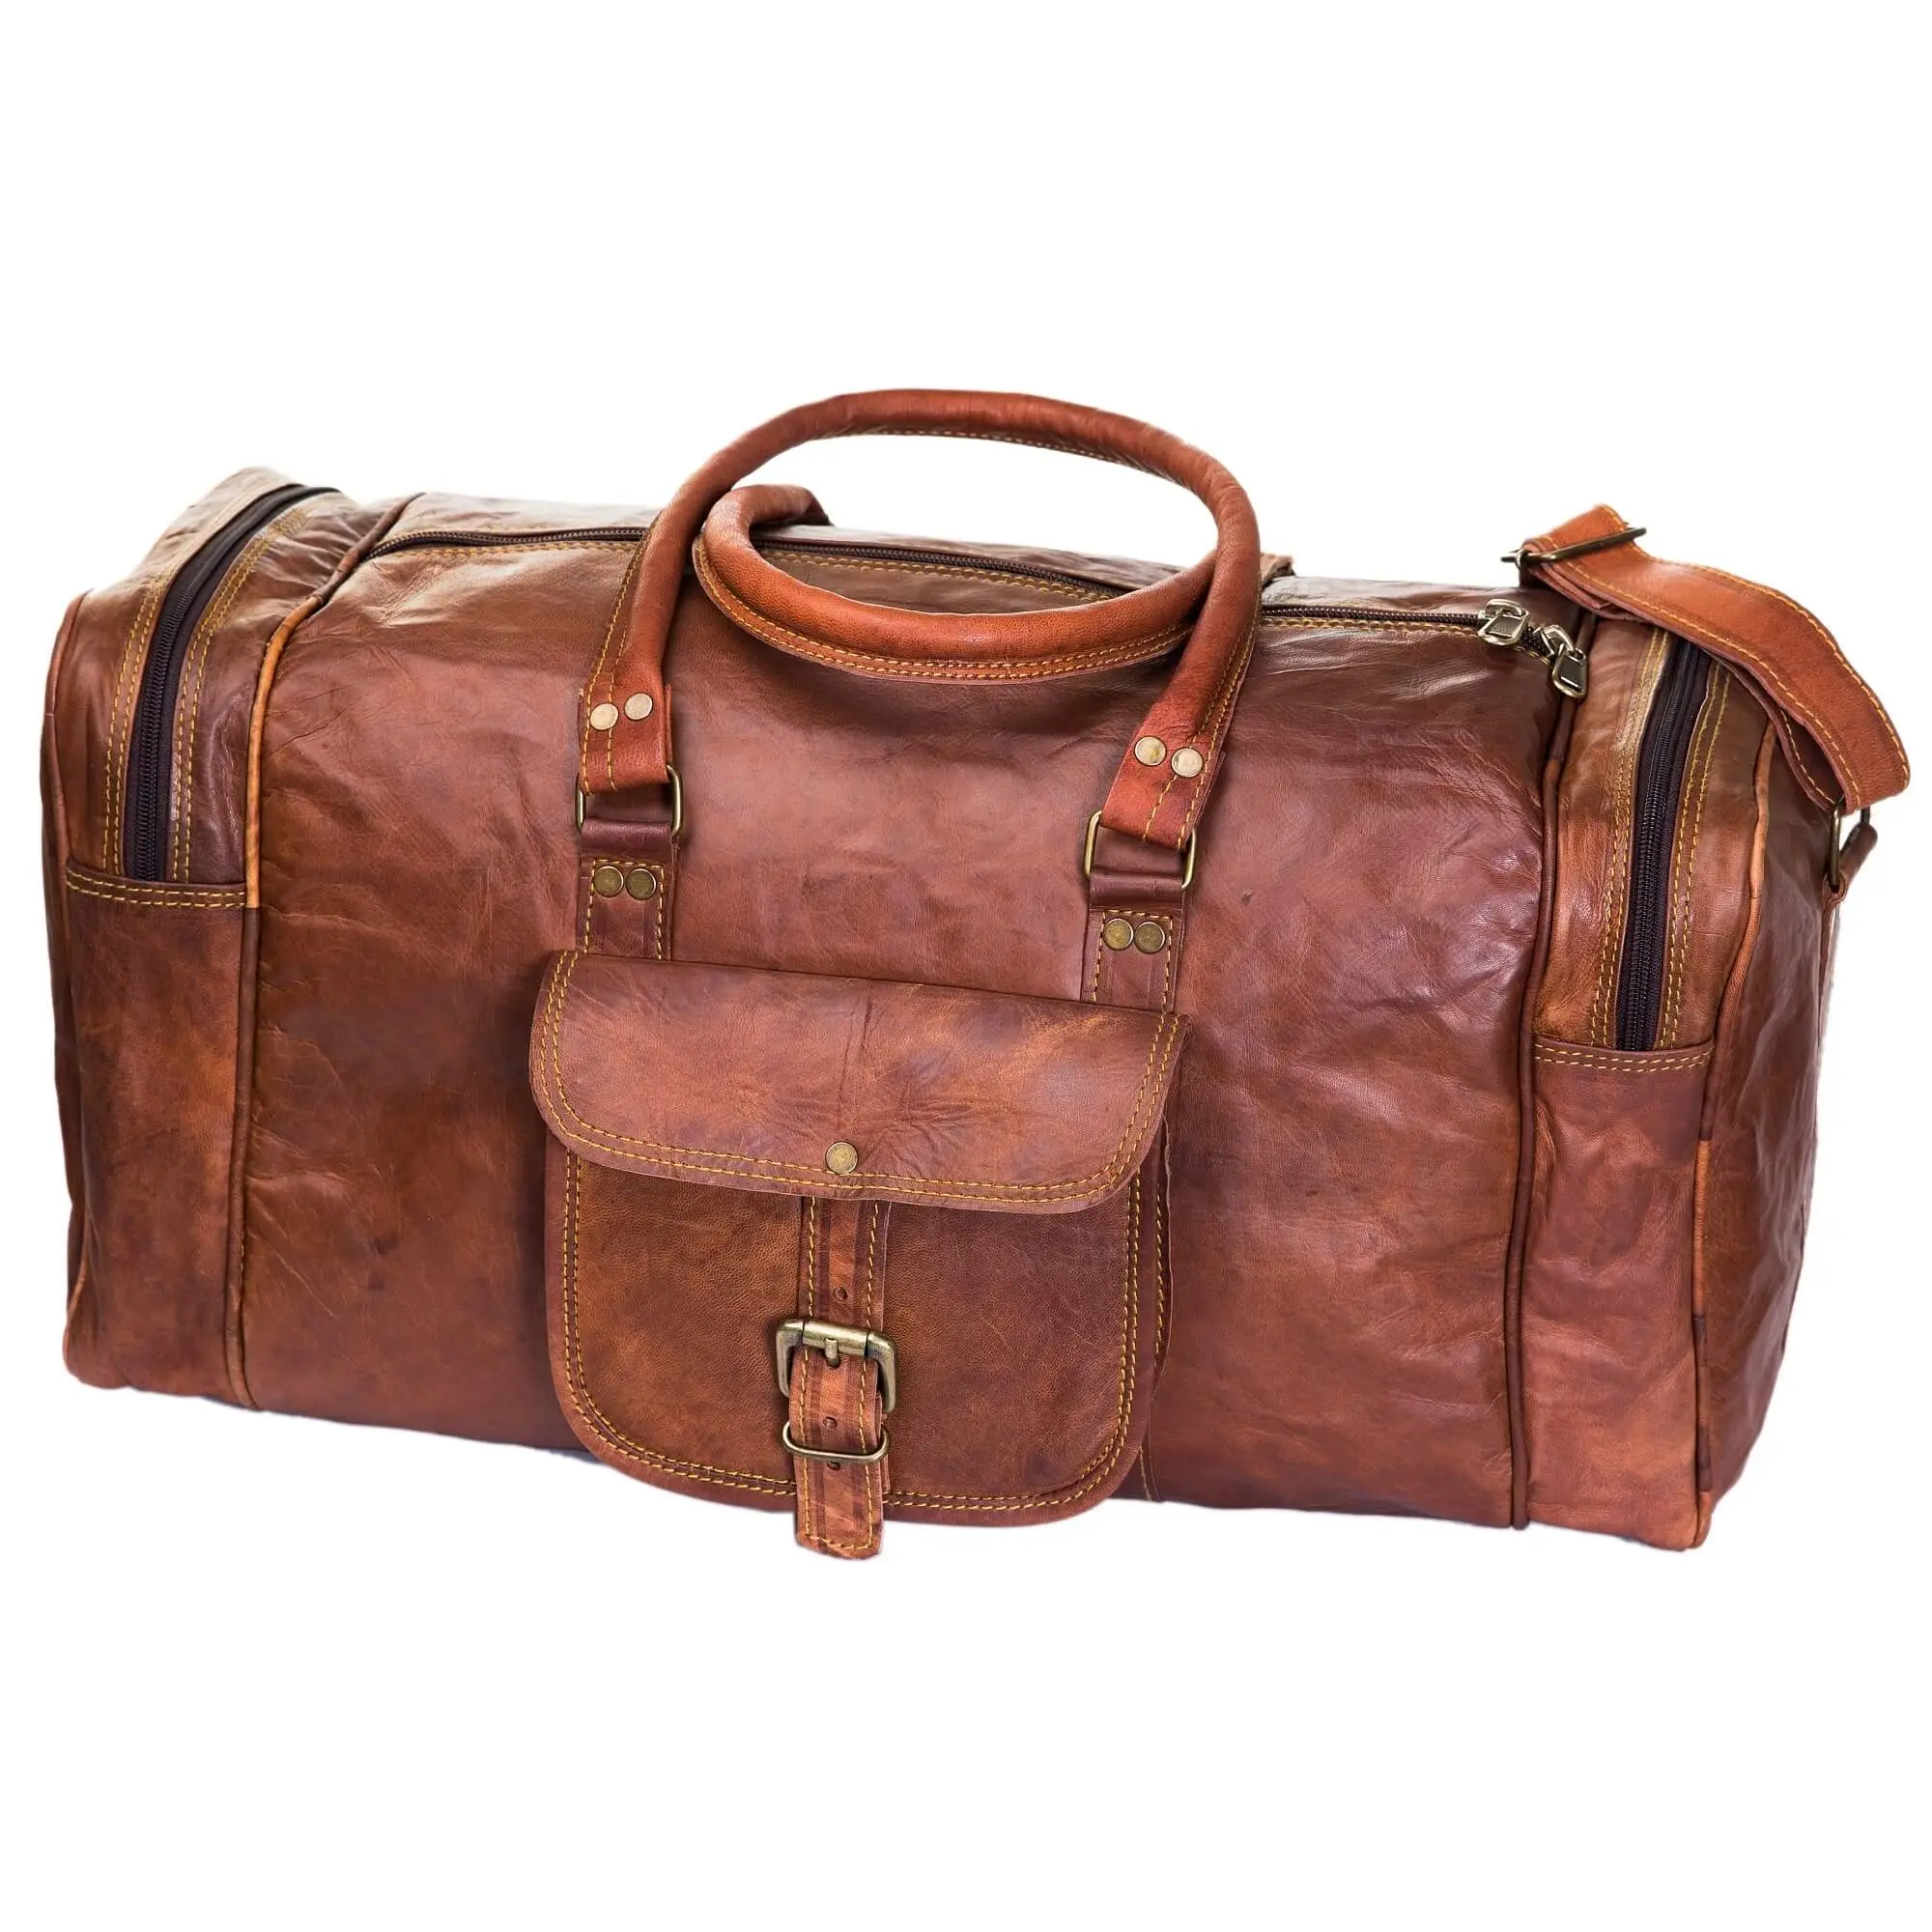 High Quality Leather Travel Duffle Bag Waterproof Luggage Bag For Men and Women At Wholesale Price From USA